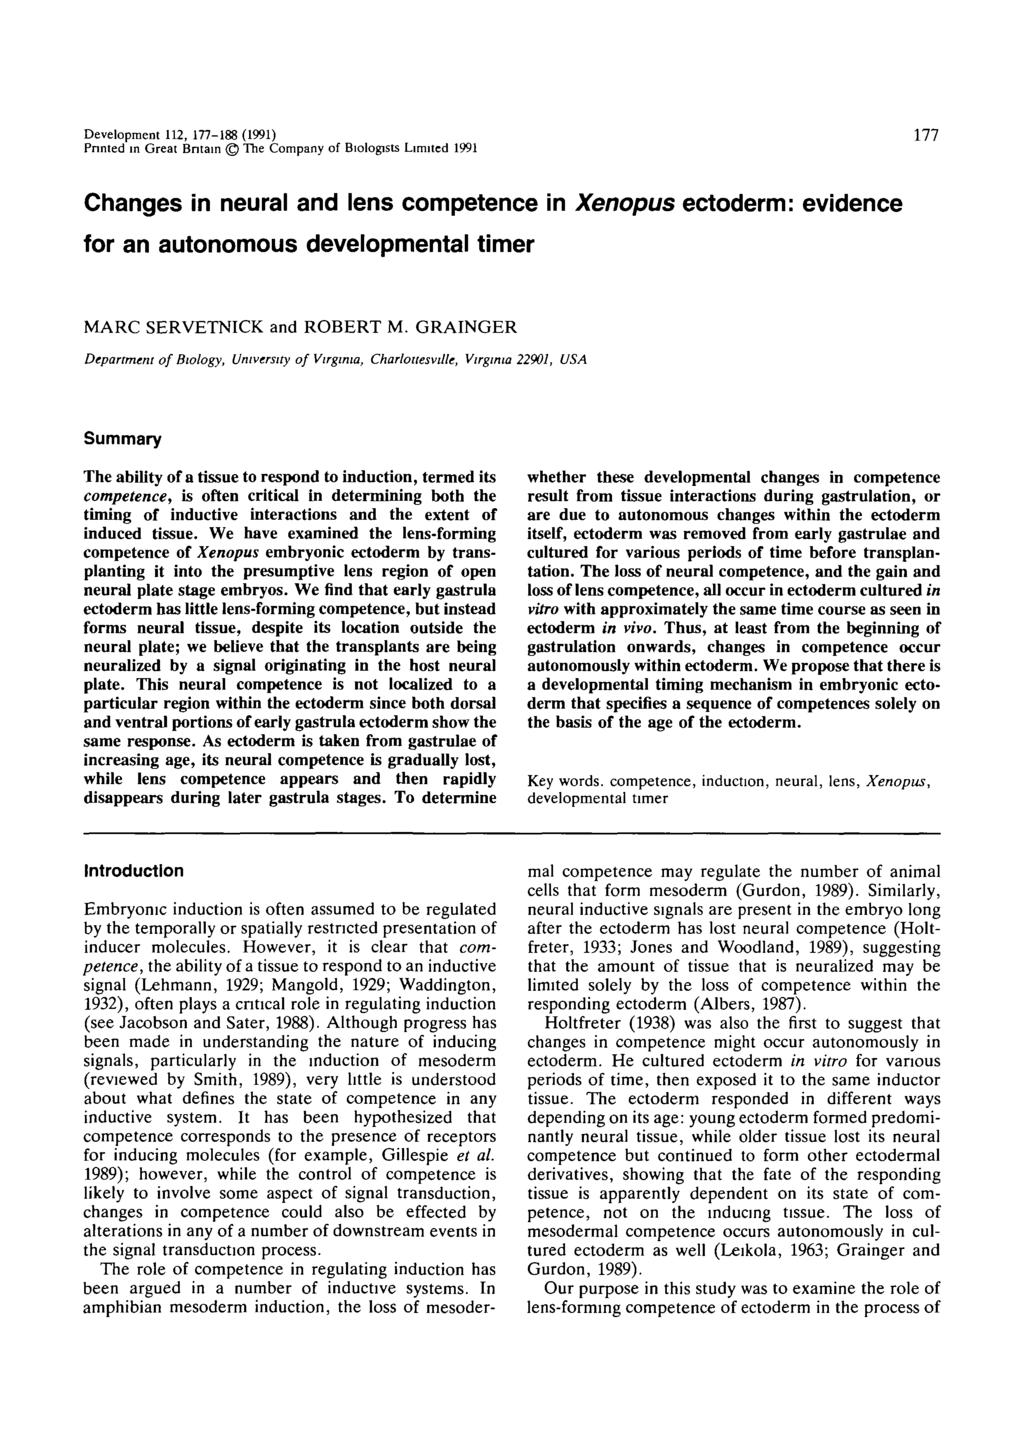 Development 112, 177-188 (1991) Printed in Great Britain The Company of Biologists Limited 1991 177 Changes in neural and lens competence in Xenopus ectoderm: evidence for an autonomous developmental